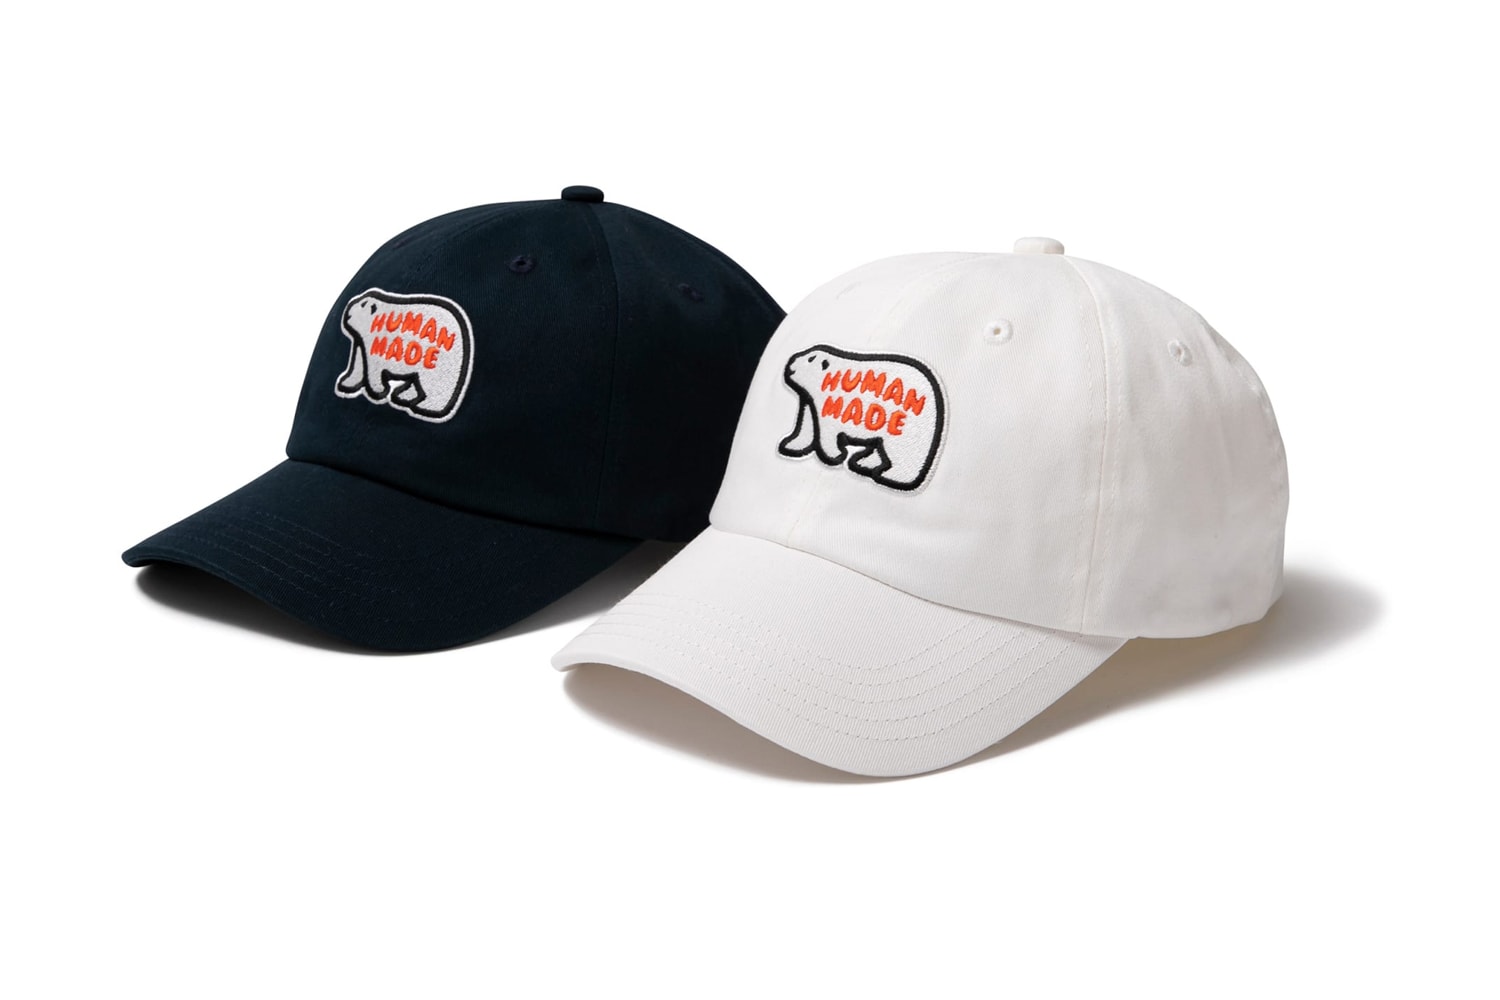 HUMAN MADE Crafts Limited Edition T-Shirt & Accessories for STORE by NIGO six panel cap hat parts box crate bear logo dryalls duck drop date details 